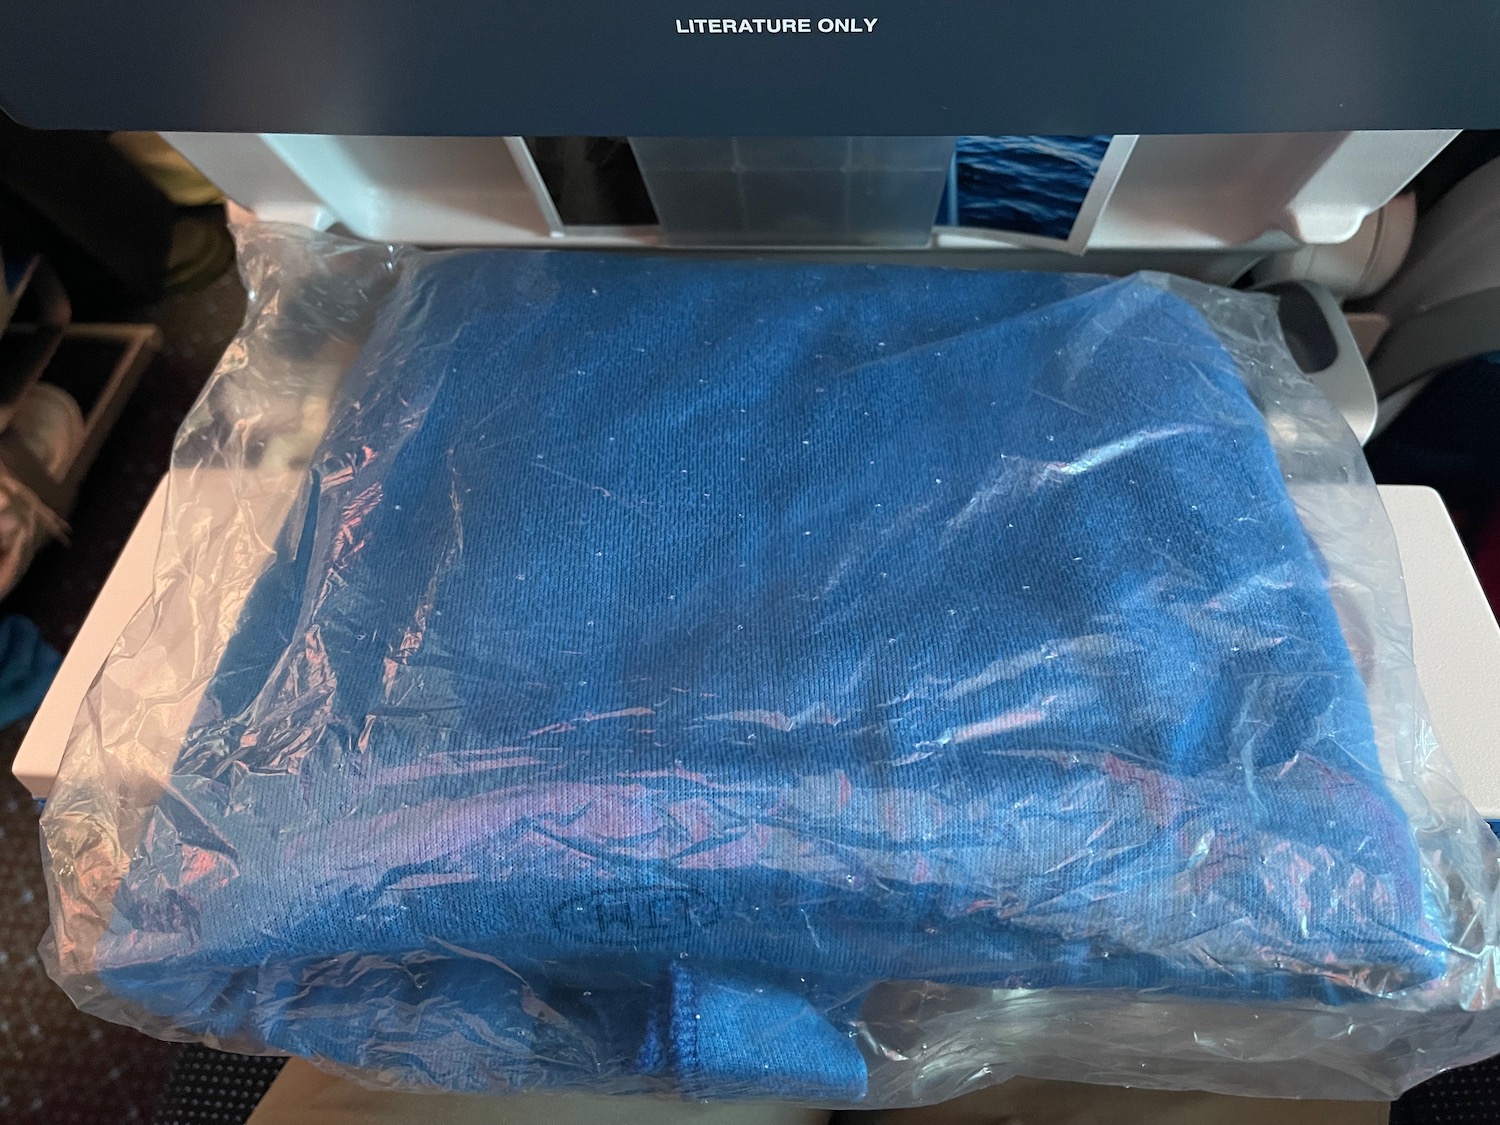 a blue blanket in a plastic bag